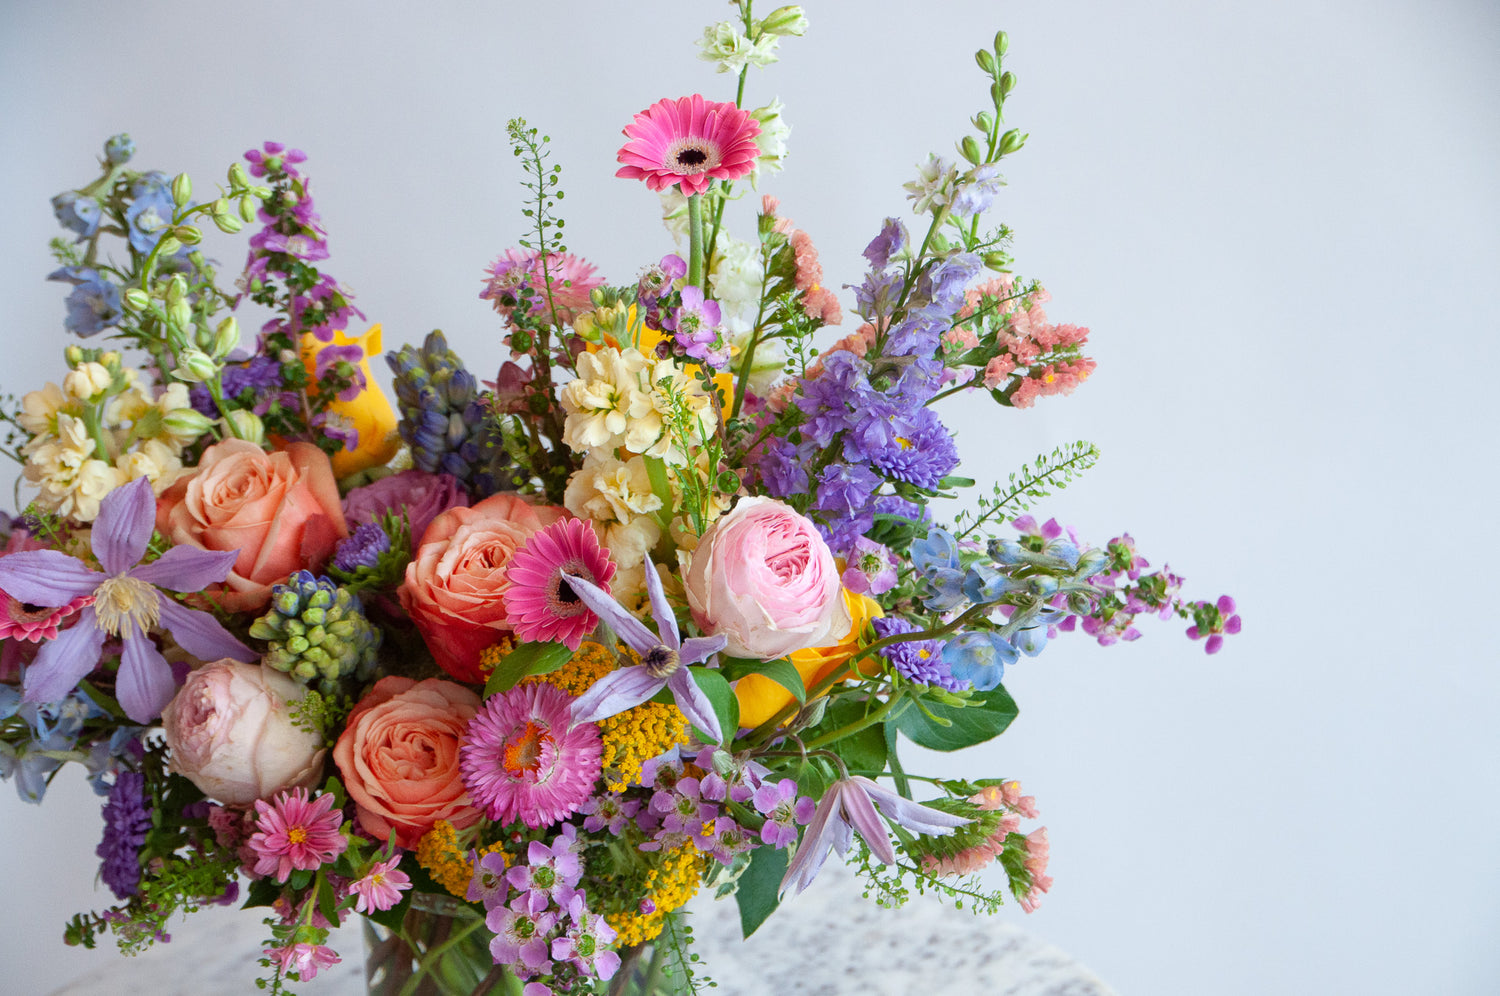 Close up of the blooms in a flower arrangement. The flowers are many colors and include roses, tulips, daisies, snapdragon, clematis, stock, straw flower, and delphinium.